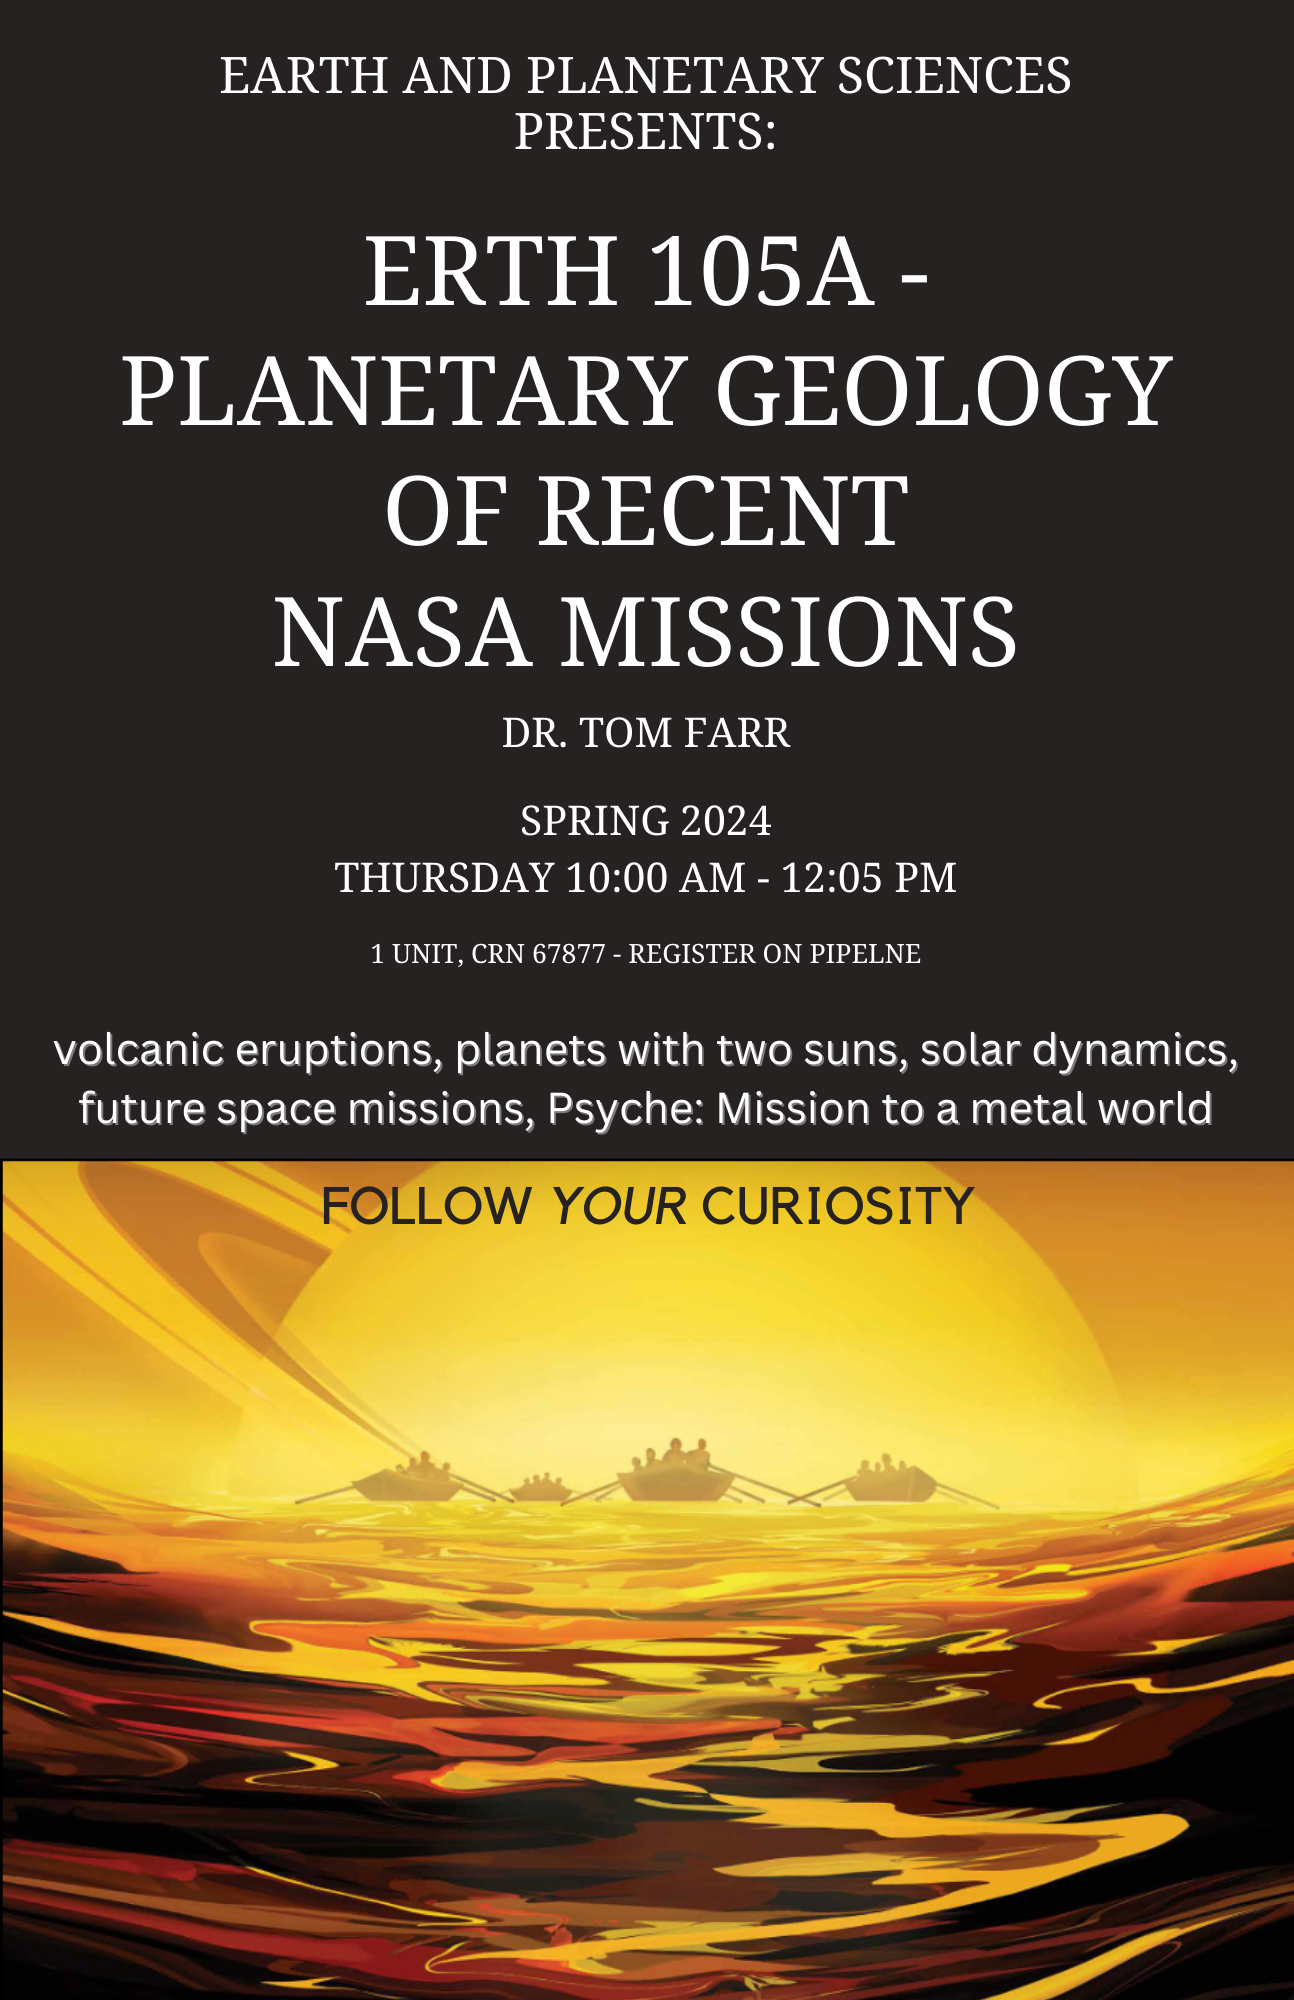 ERTH 105A Planetary Geology of Recent NASA Missions